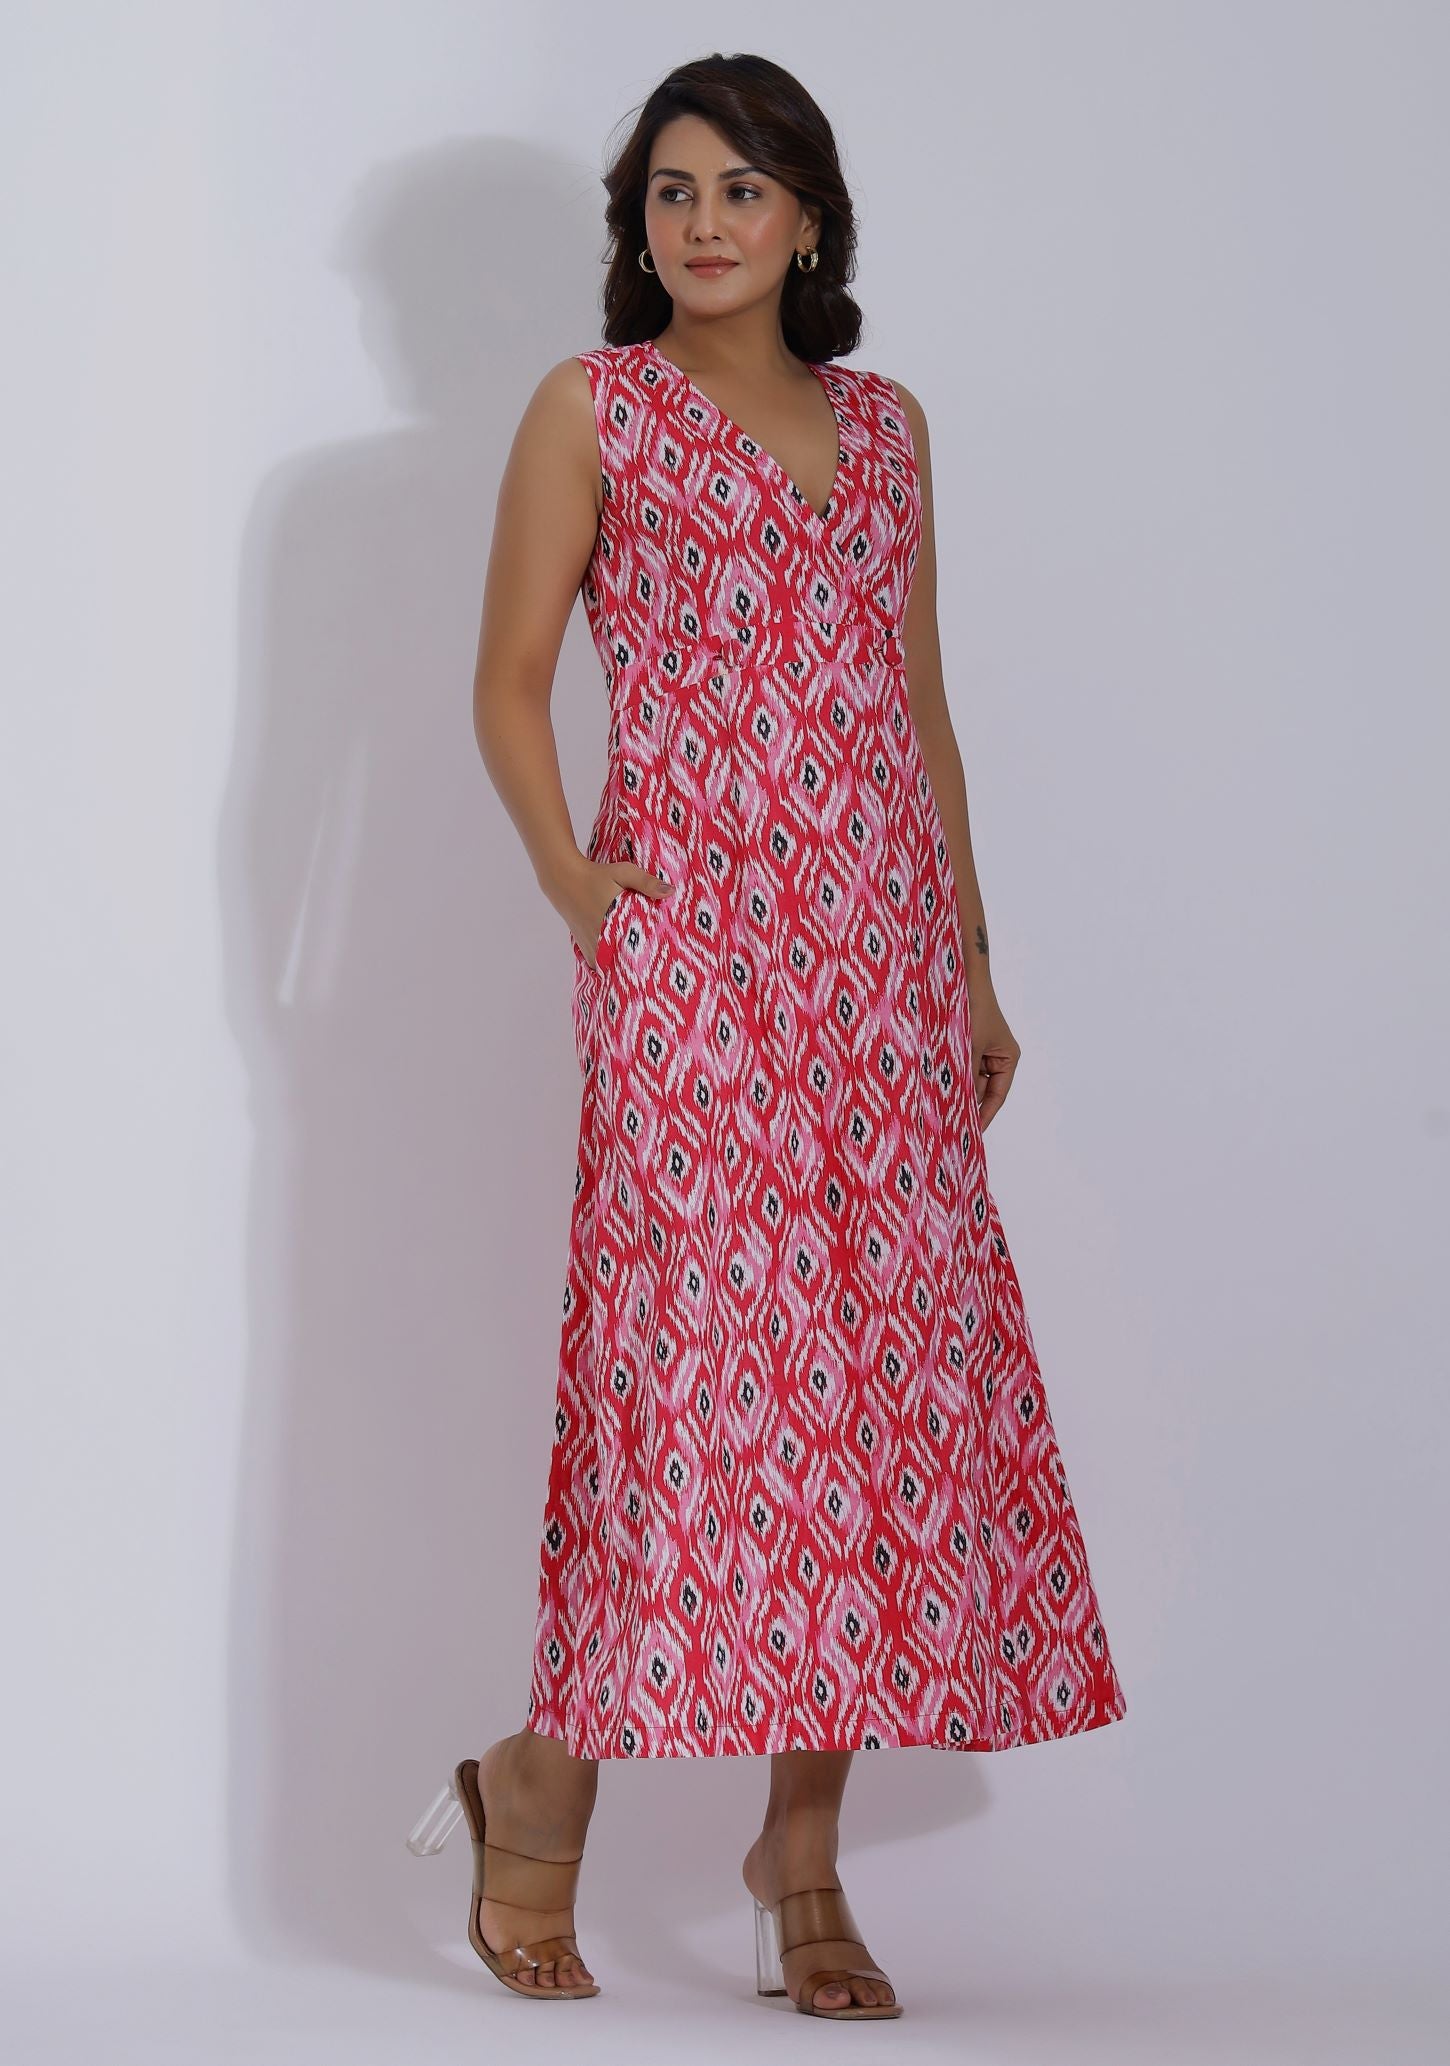 Aztec Print Cotton Dress with pockets side 1